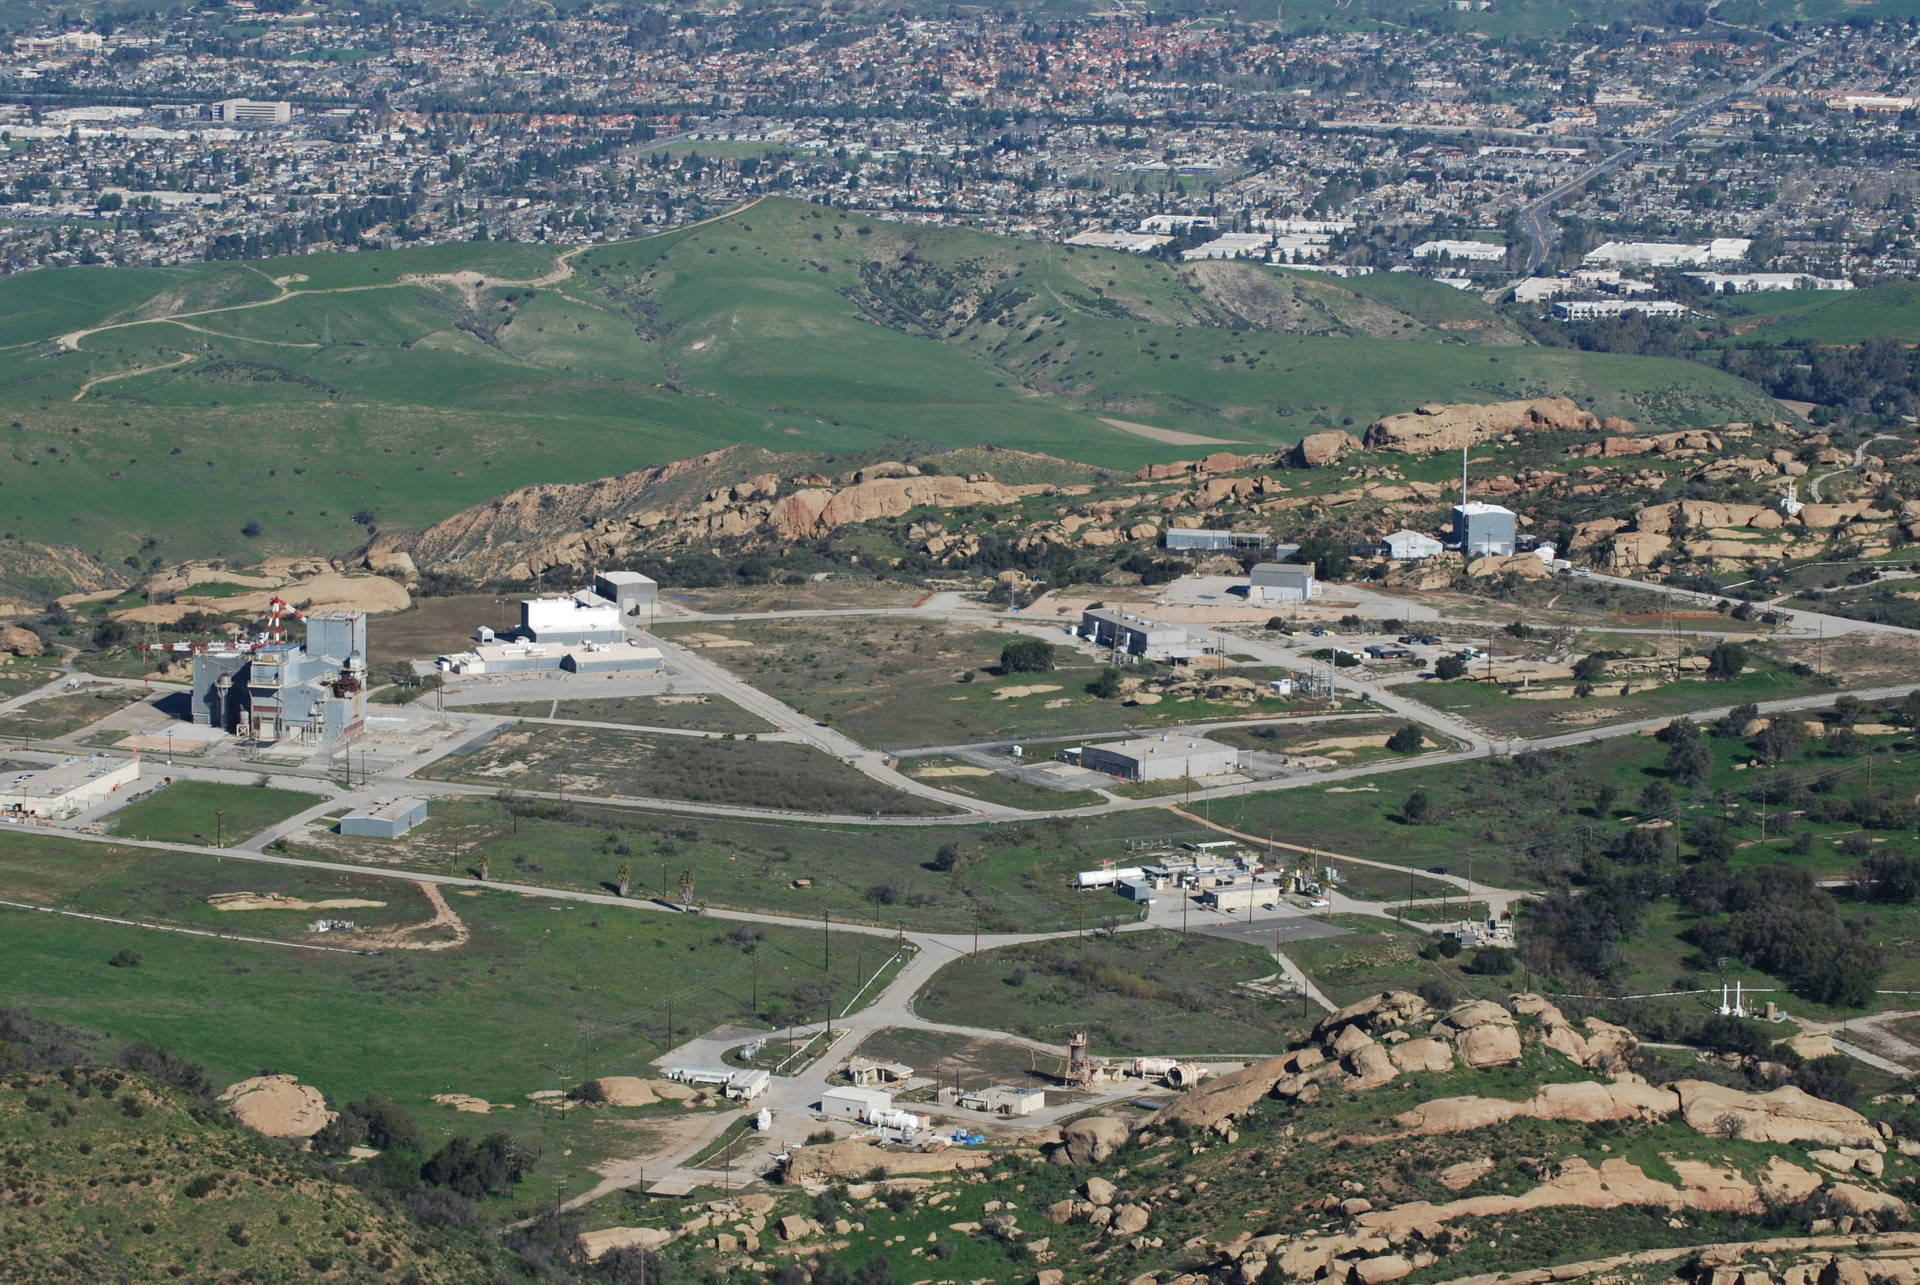 The Santa Susana Field Laboratory lies in a mountain range between the San Fernando Valley and the city of Simi Valley. This is a view of the part of the laboratory where a nuclear reactor underwent a partial meltdown in 1959. Santa Susana's nuclear and chemical contamination has never been fully cleaned up. William Preston Bowling